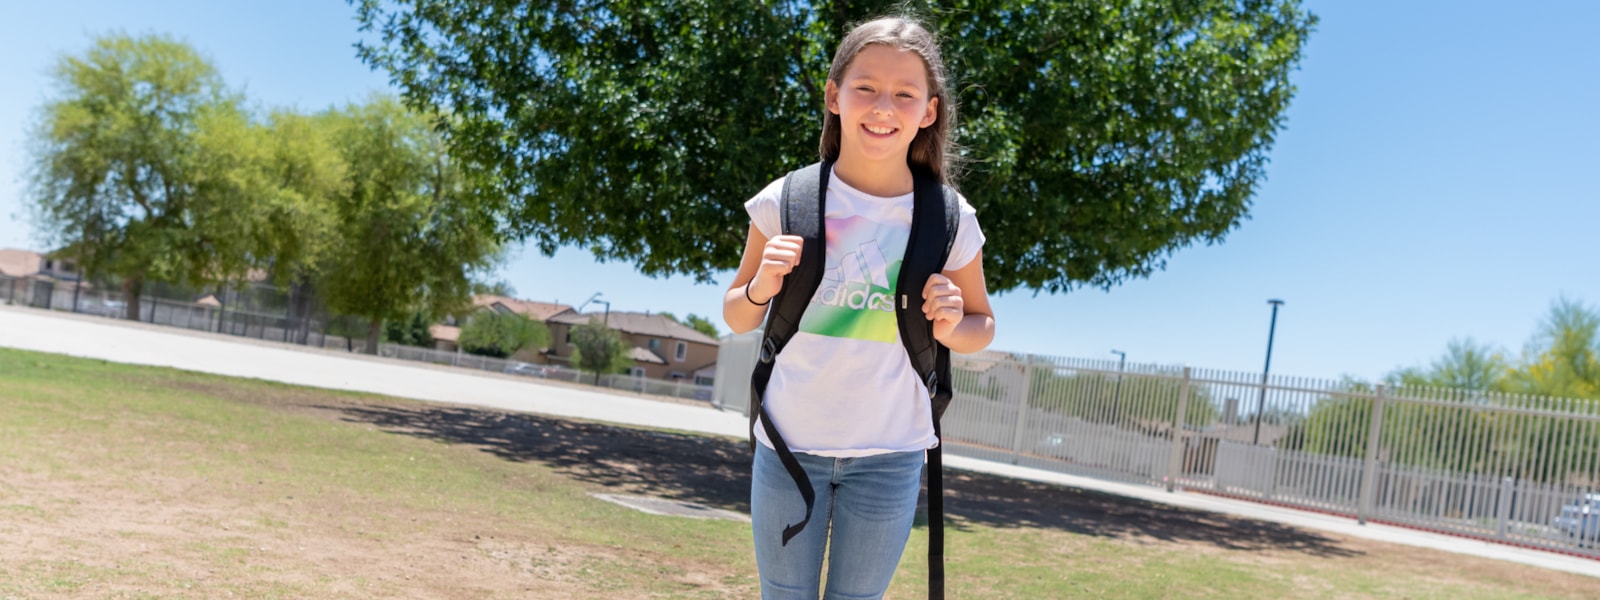 Student with backpack ready to enroll in school